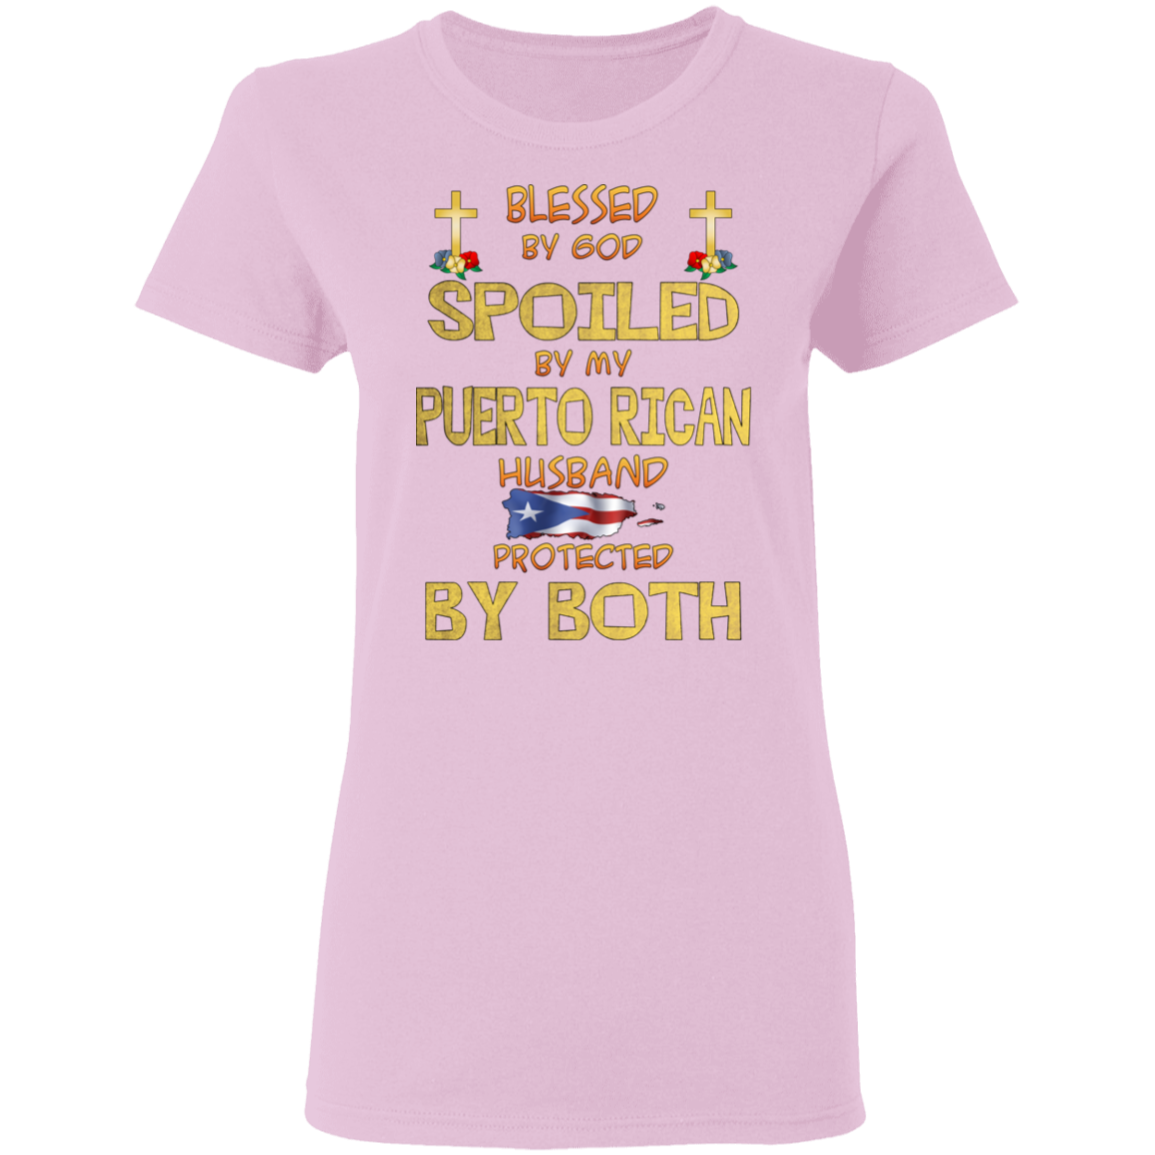 Blessed and Protected Ladies' 5.3 oz. T-Shirt - Puerto Rican Pride